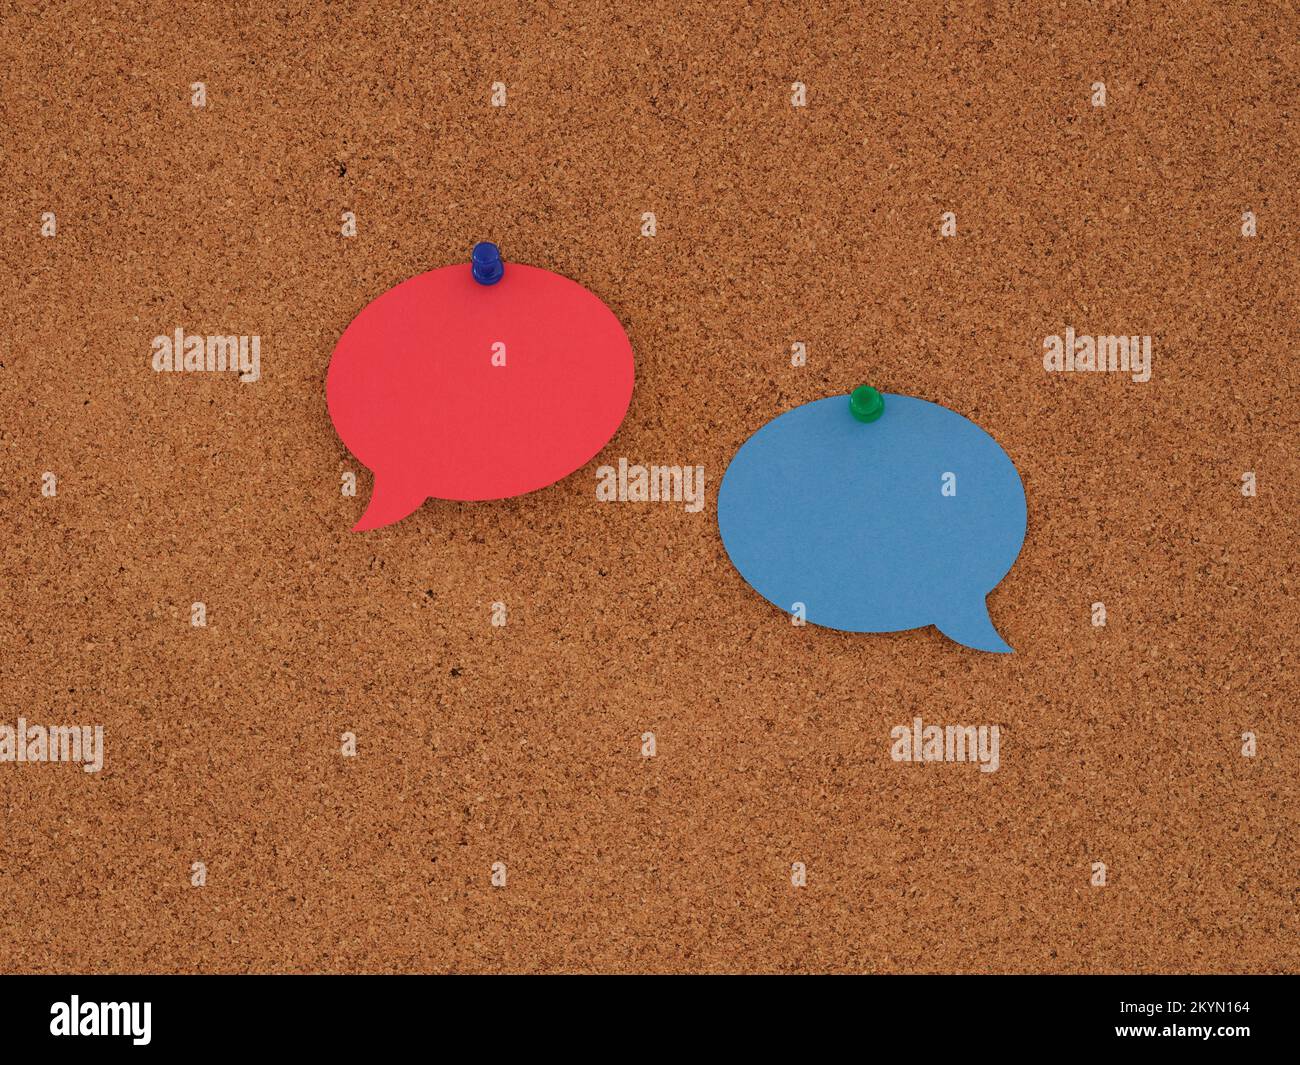 A blank red speech bubble and a blank blue speech bubble pinned to a corkboard. Close up. Stock Photo